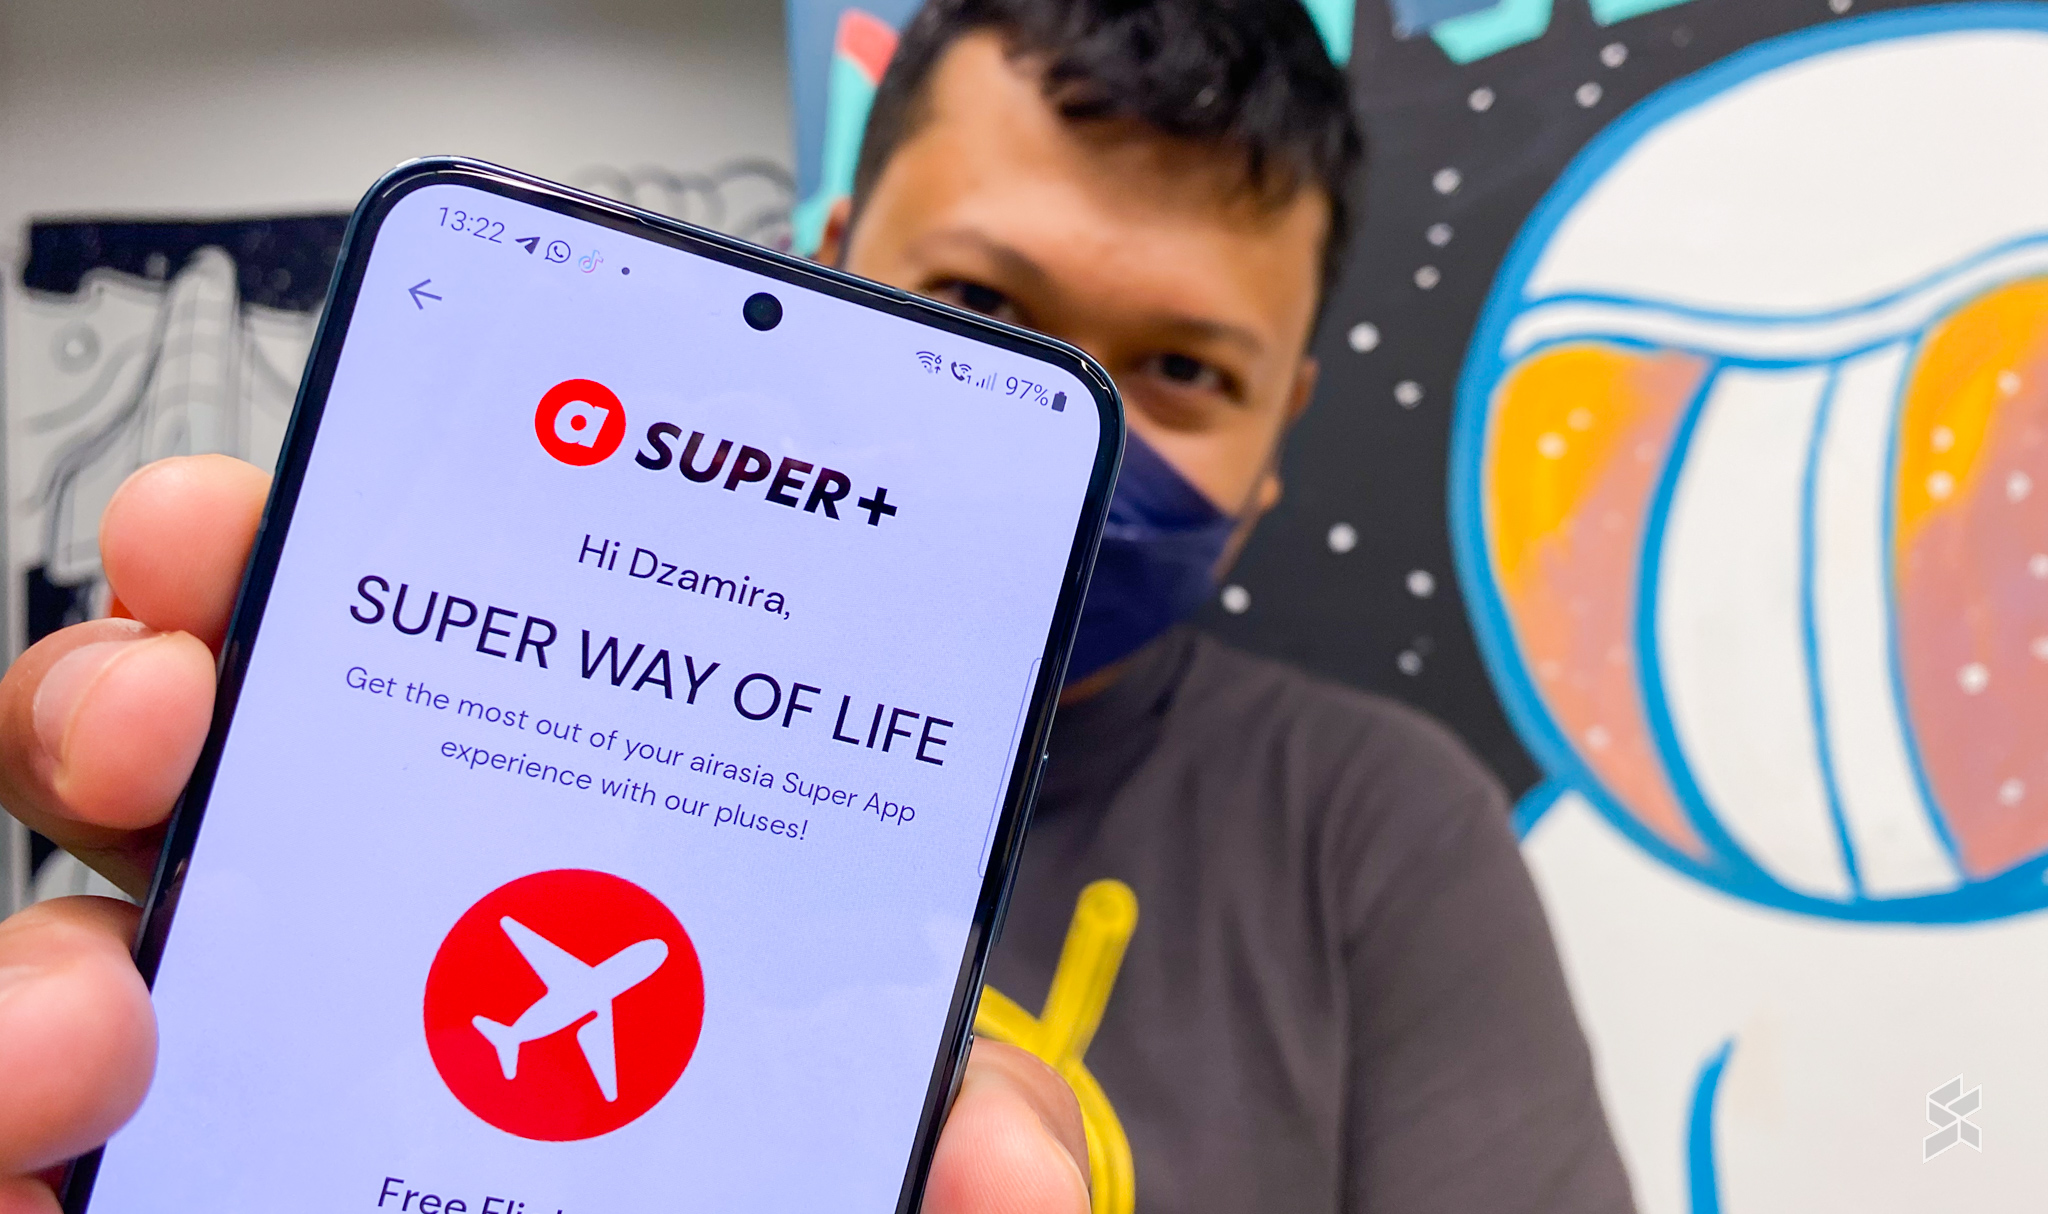 AirAsia Super Plus: Here's what you need to know about its unlimited flight  pass - SoyaCincau